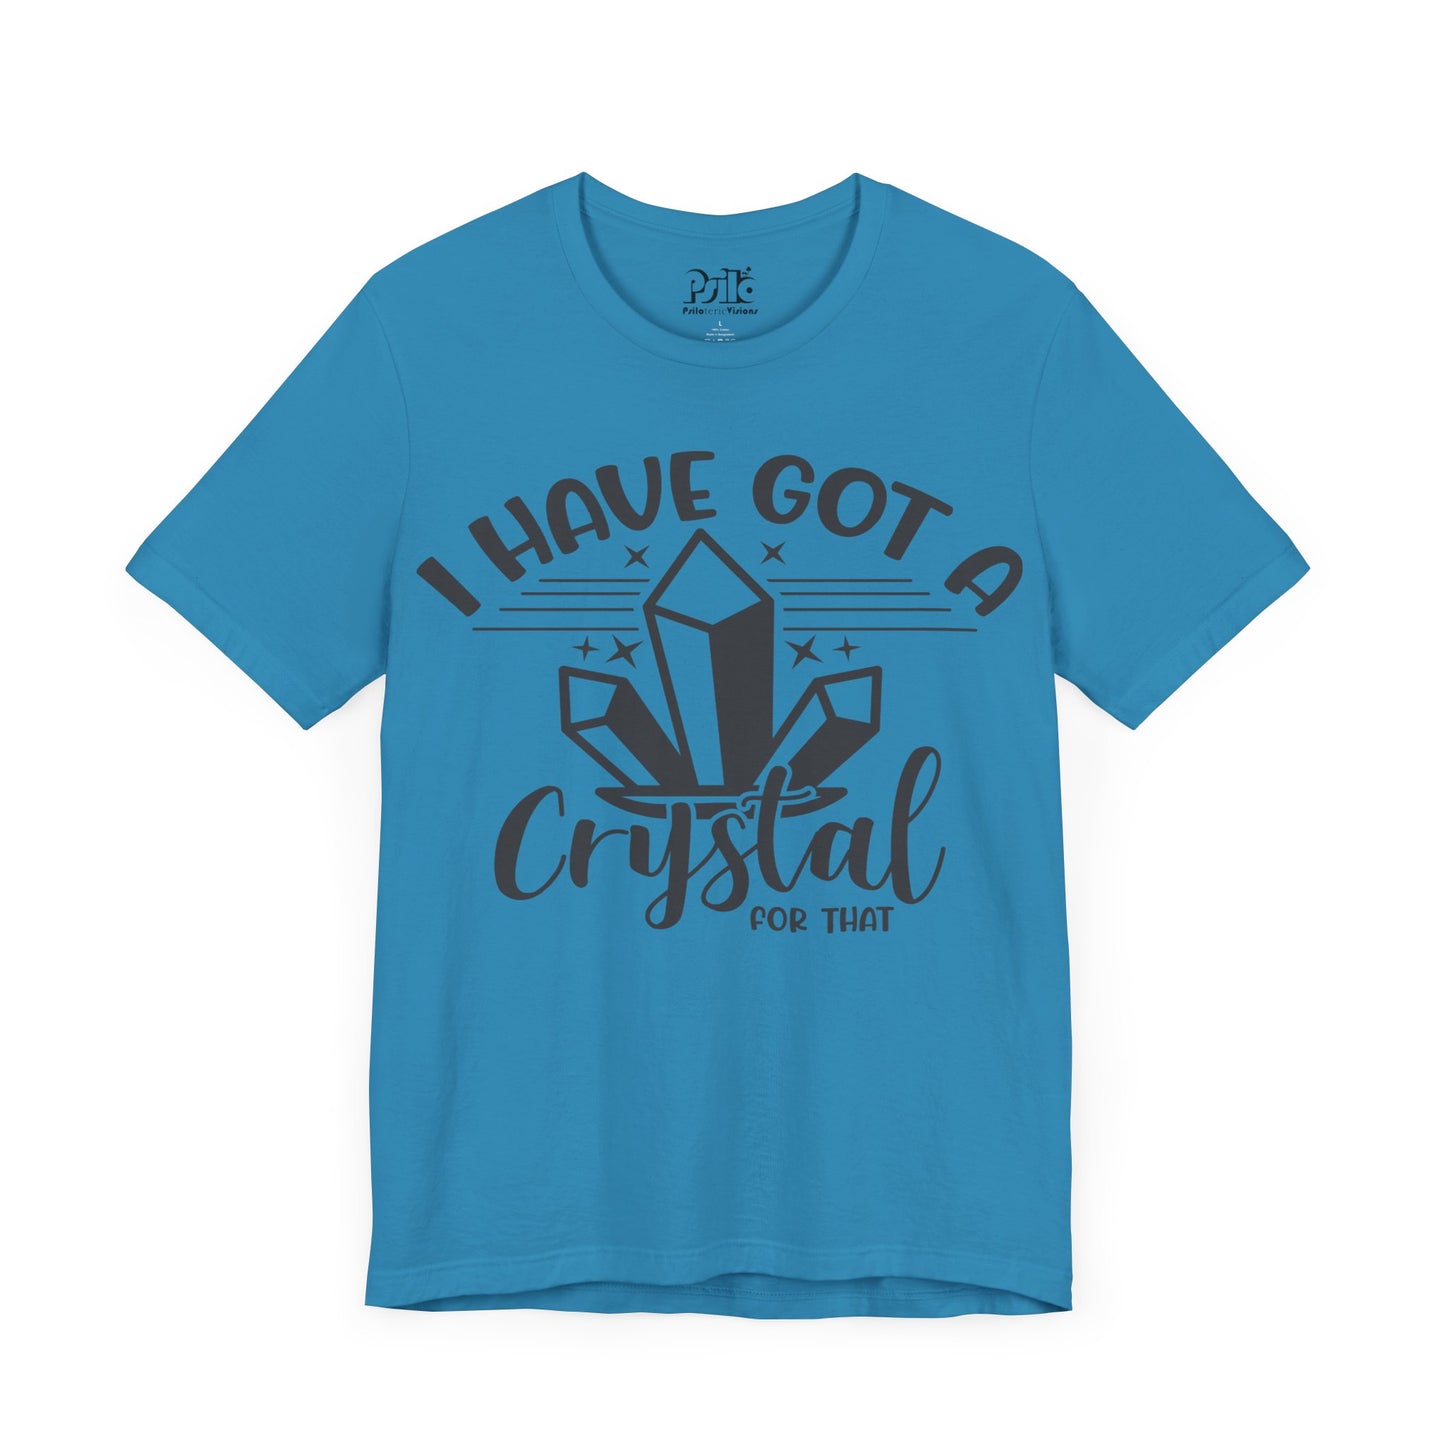 "I Have Got a Crystal for That" SHORT SLEEVE T-SHIRT